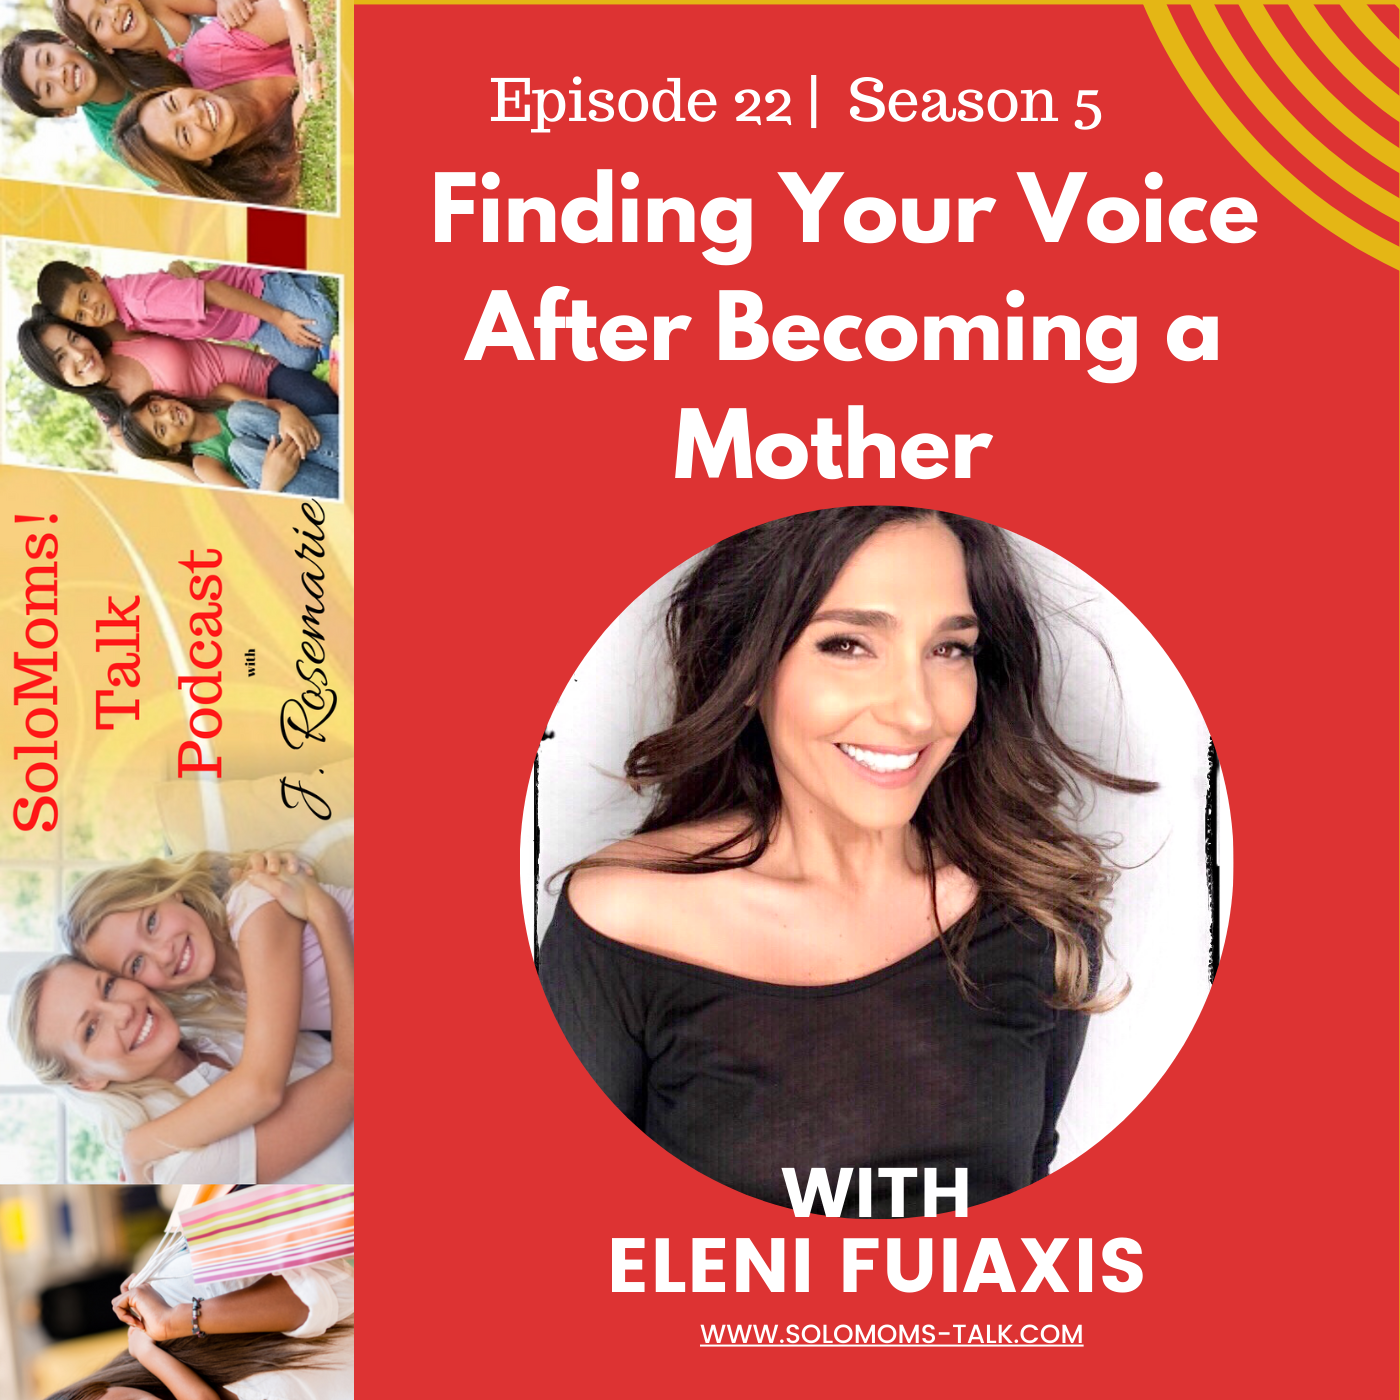 Finding Your Voice After Becoming a Mother w/Eleni Fuiaxis